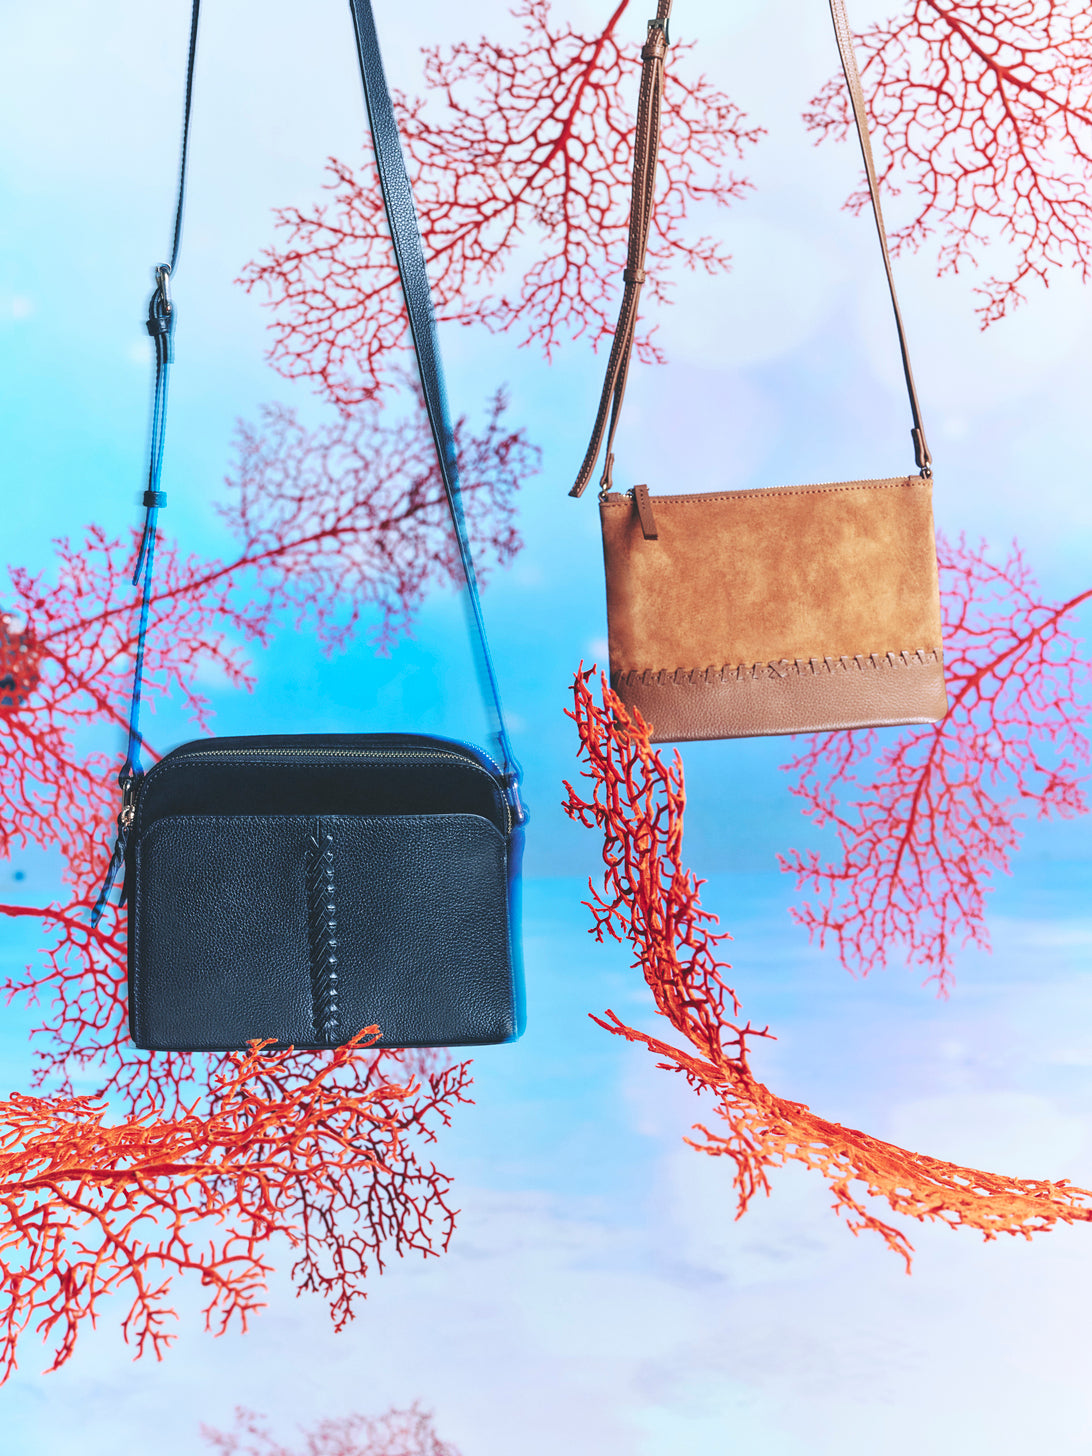 SLEEK AND SOPHISTICATED SLING BAGS FOR THE MODERN WOMAN